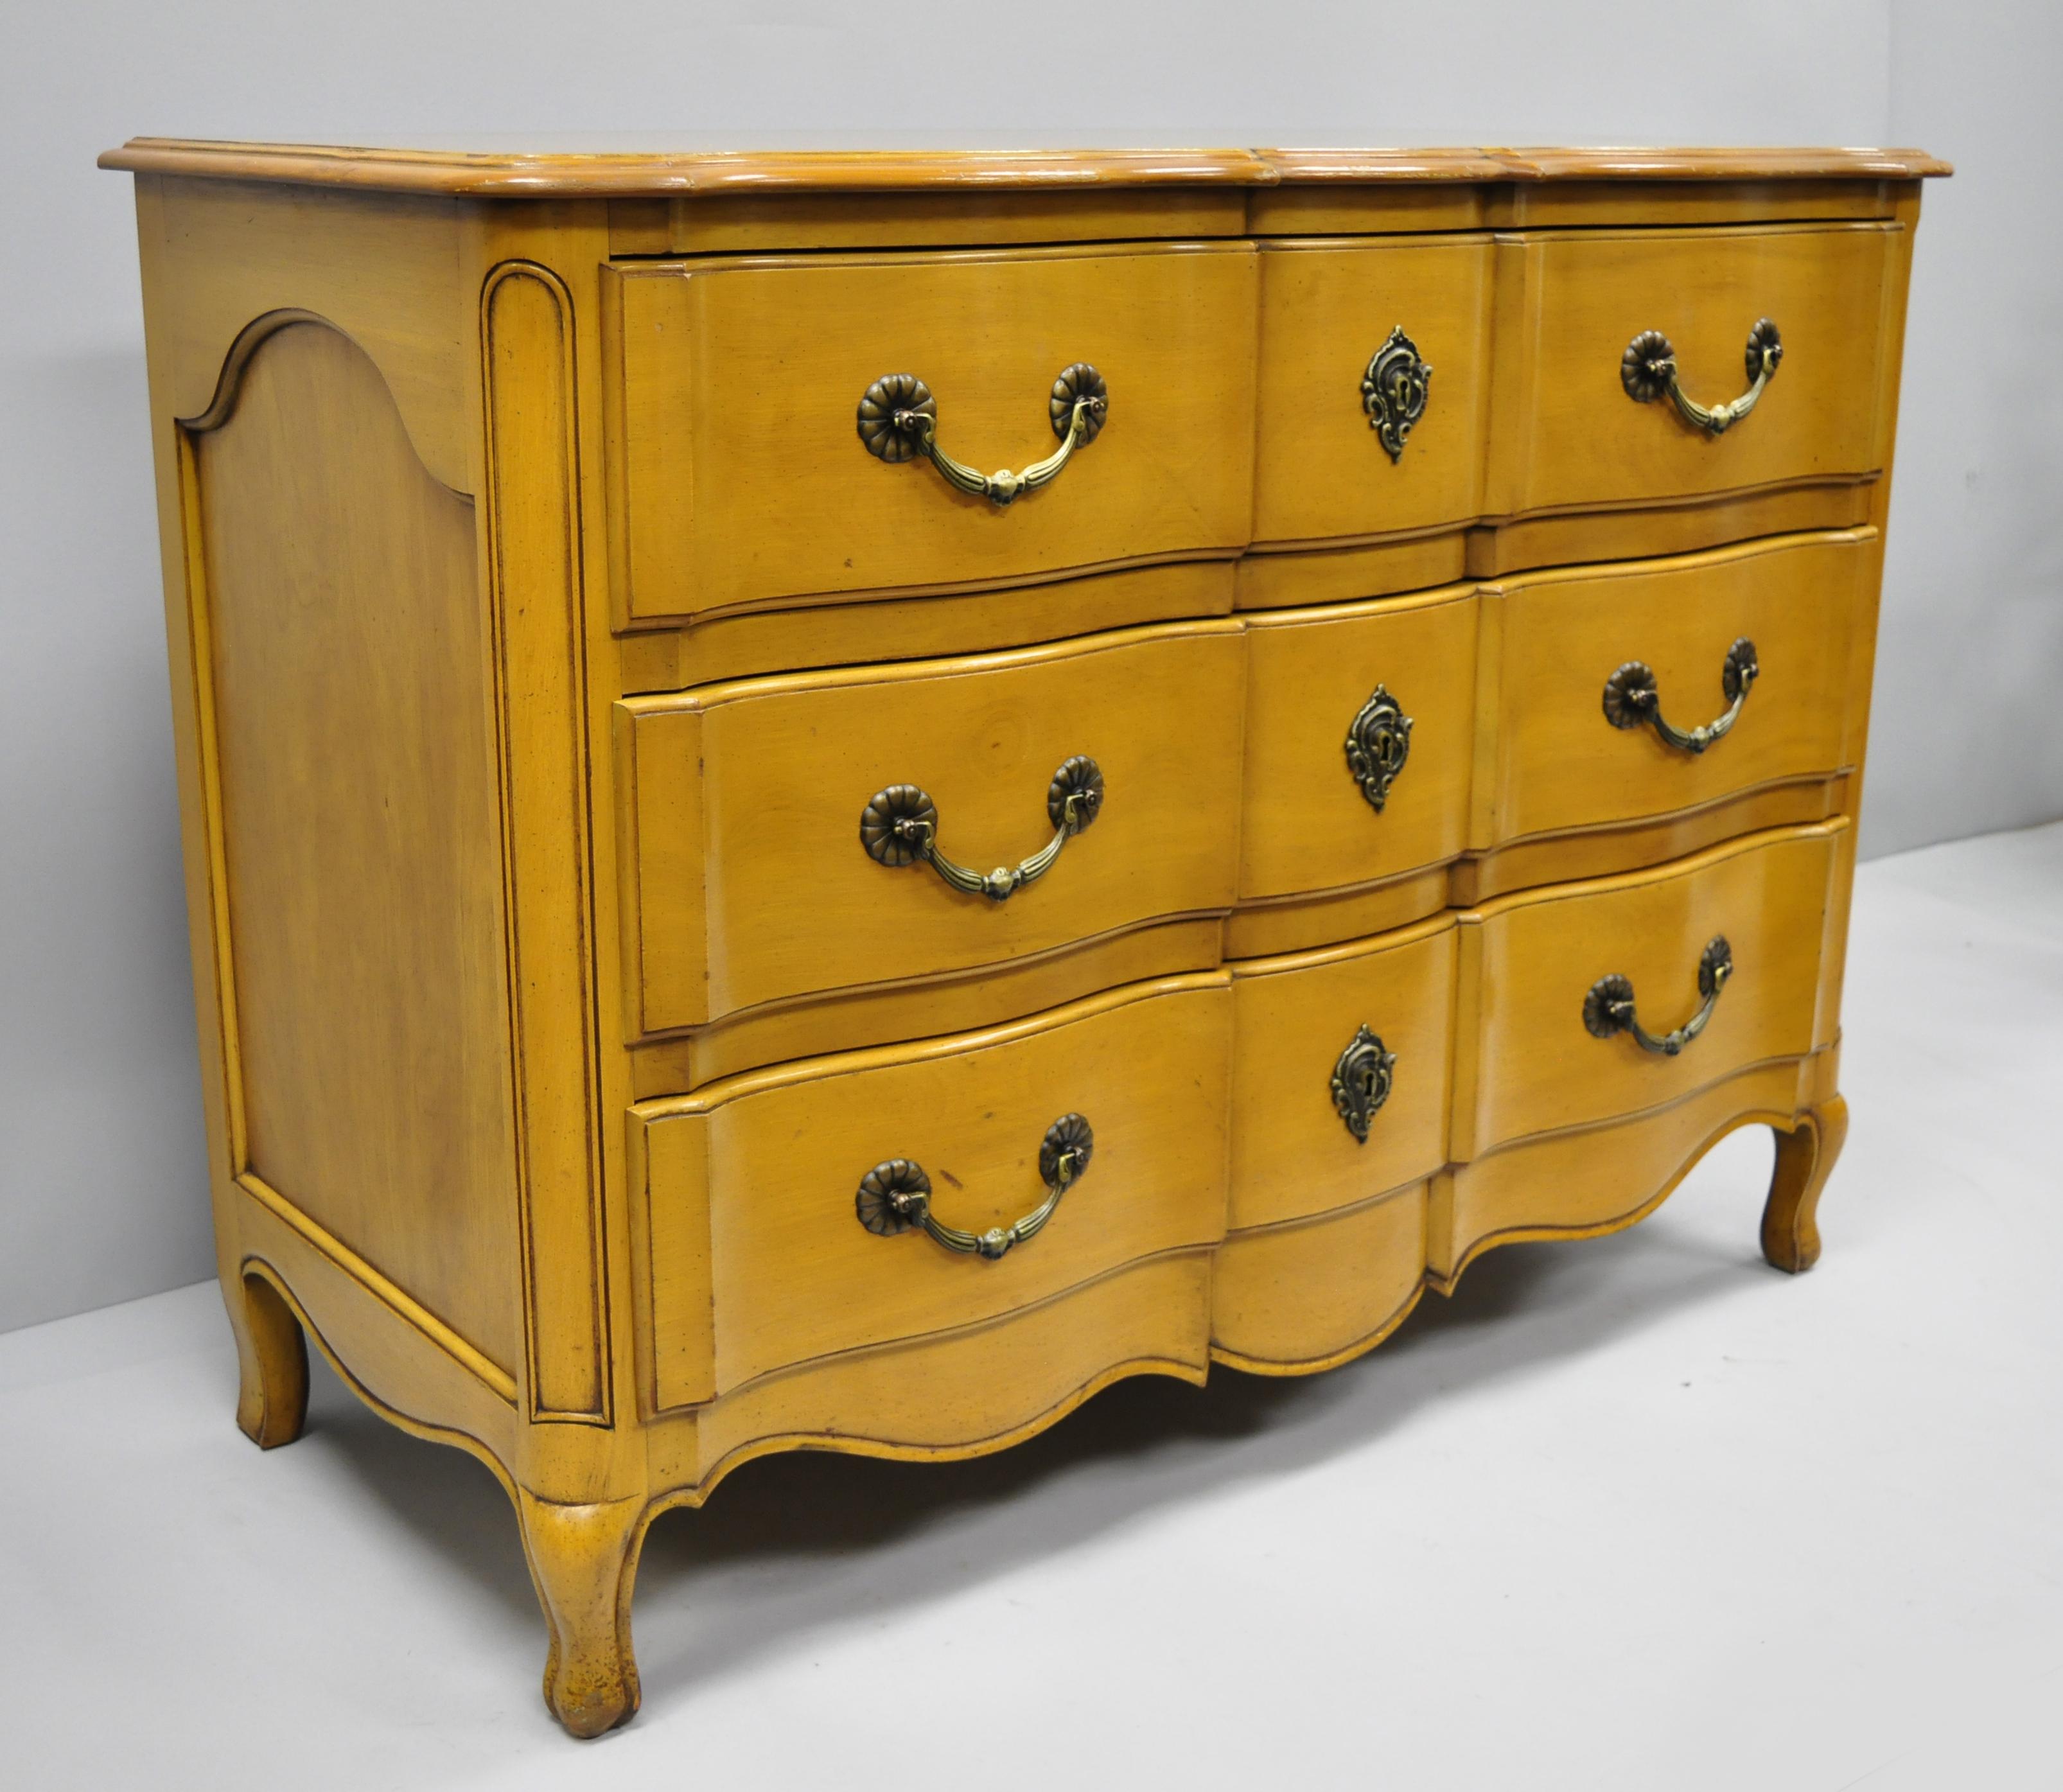 Three-drawer Country French commode by Cassard Romano. Item features solid wood construction, three dovetailed drawers, cabriole legs, solid brass hardware, carved sides, shaped top, signed 